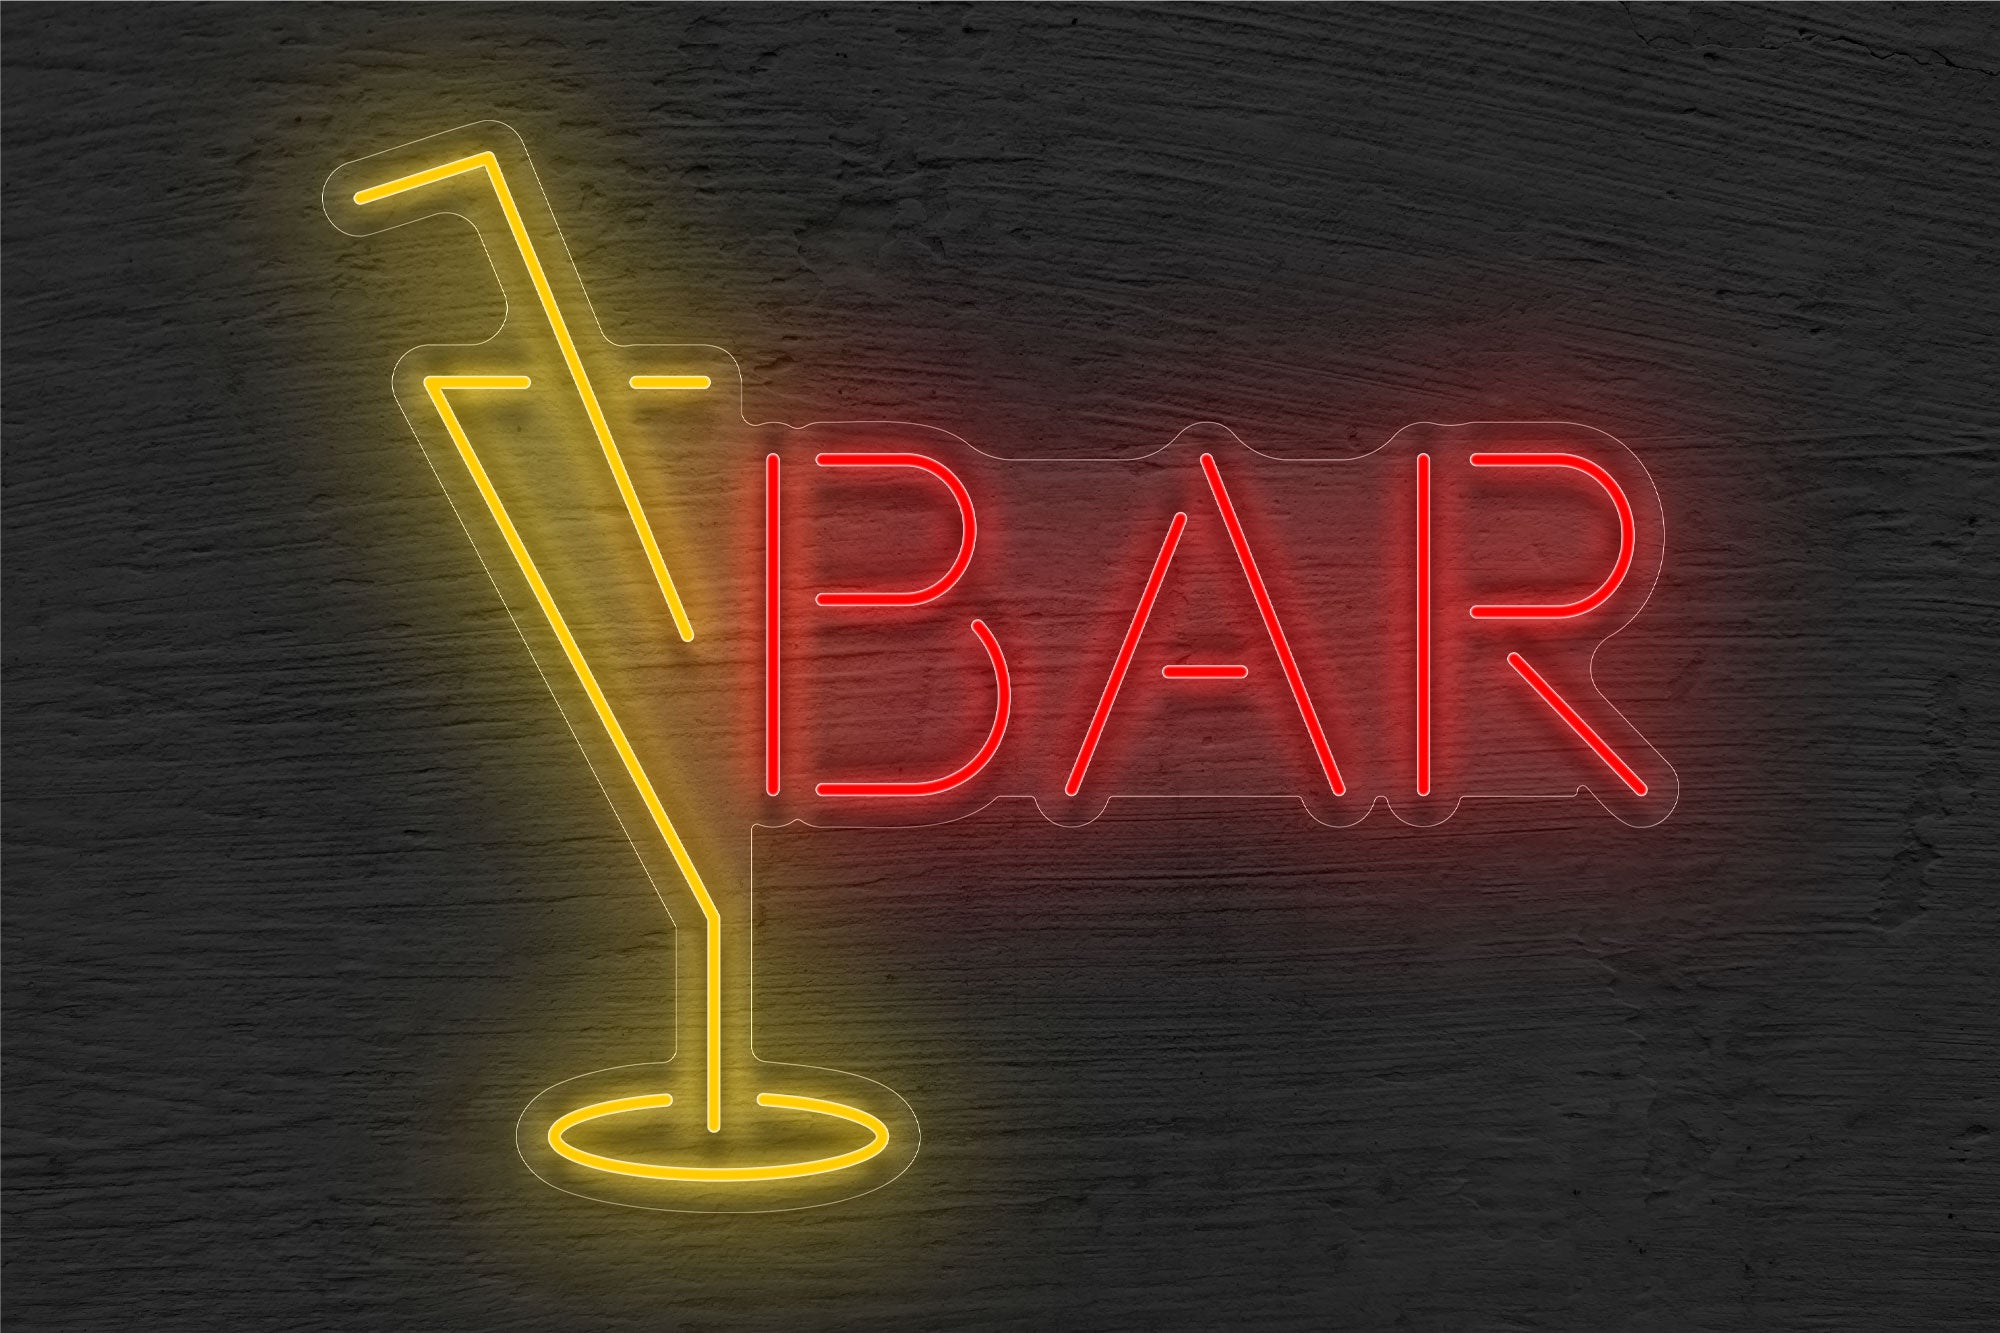 Cocktail "BAR" LED Neon Sign